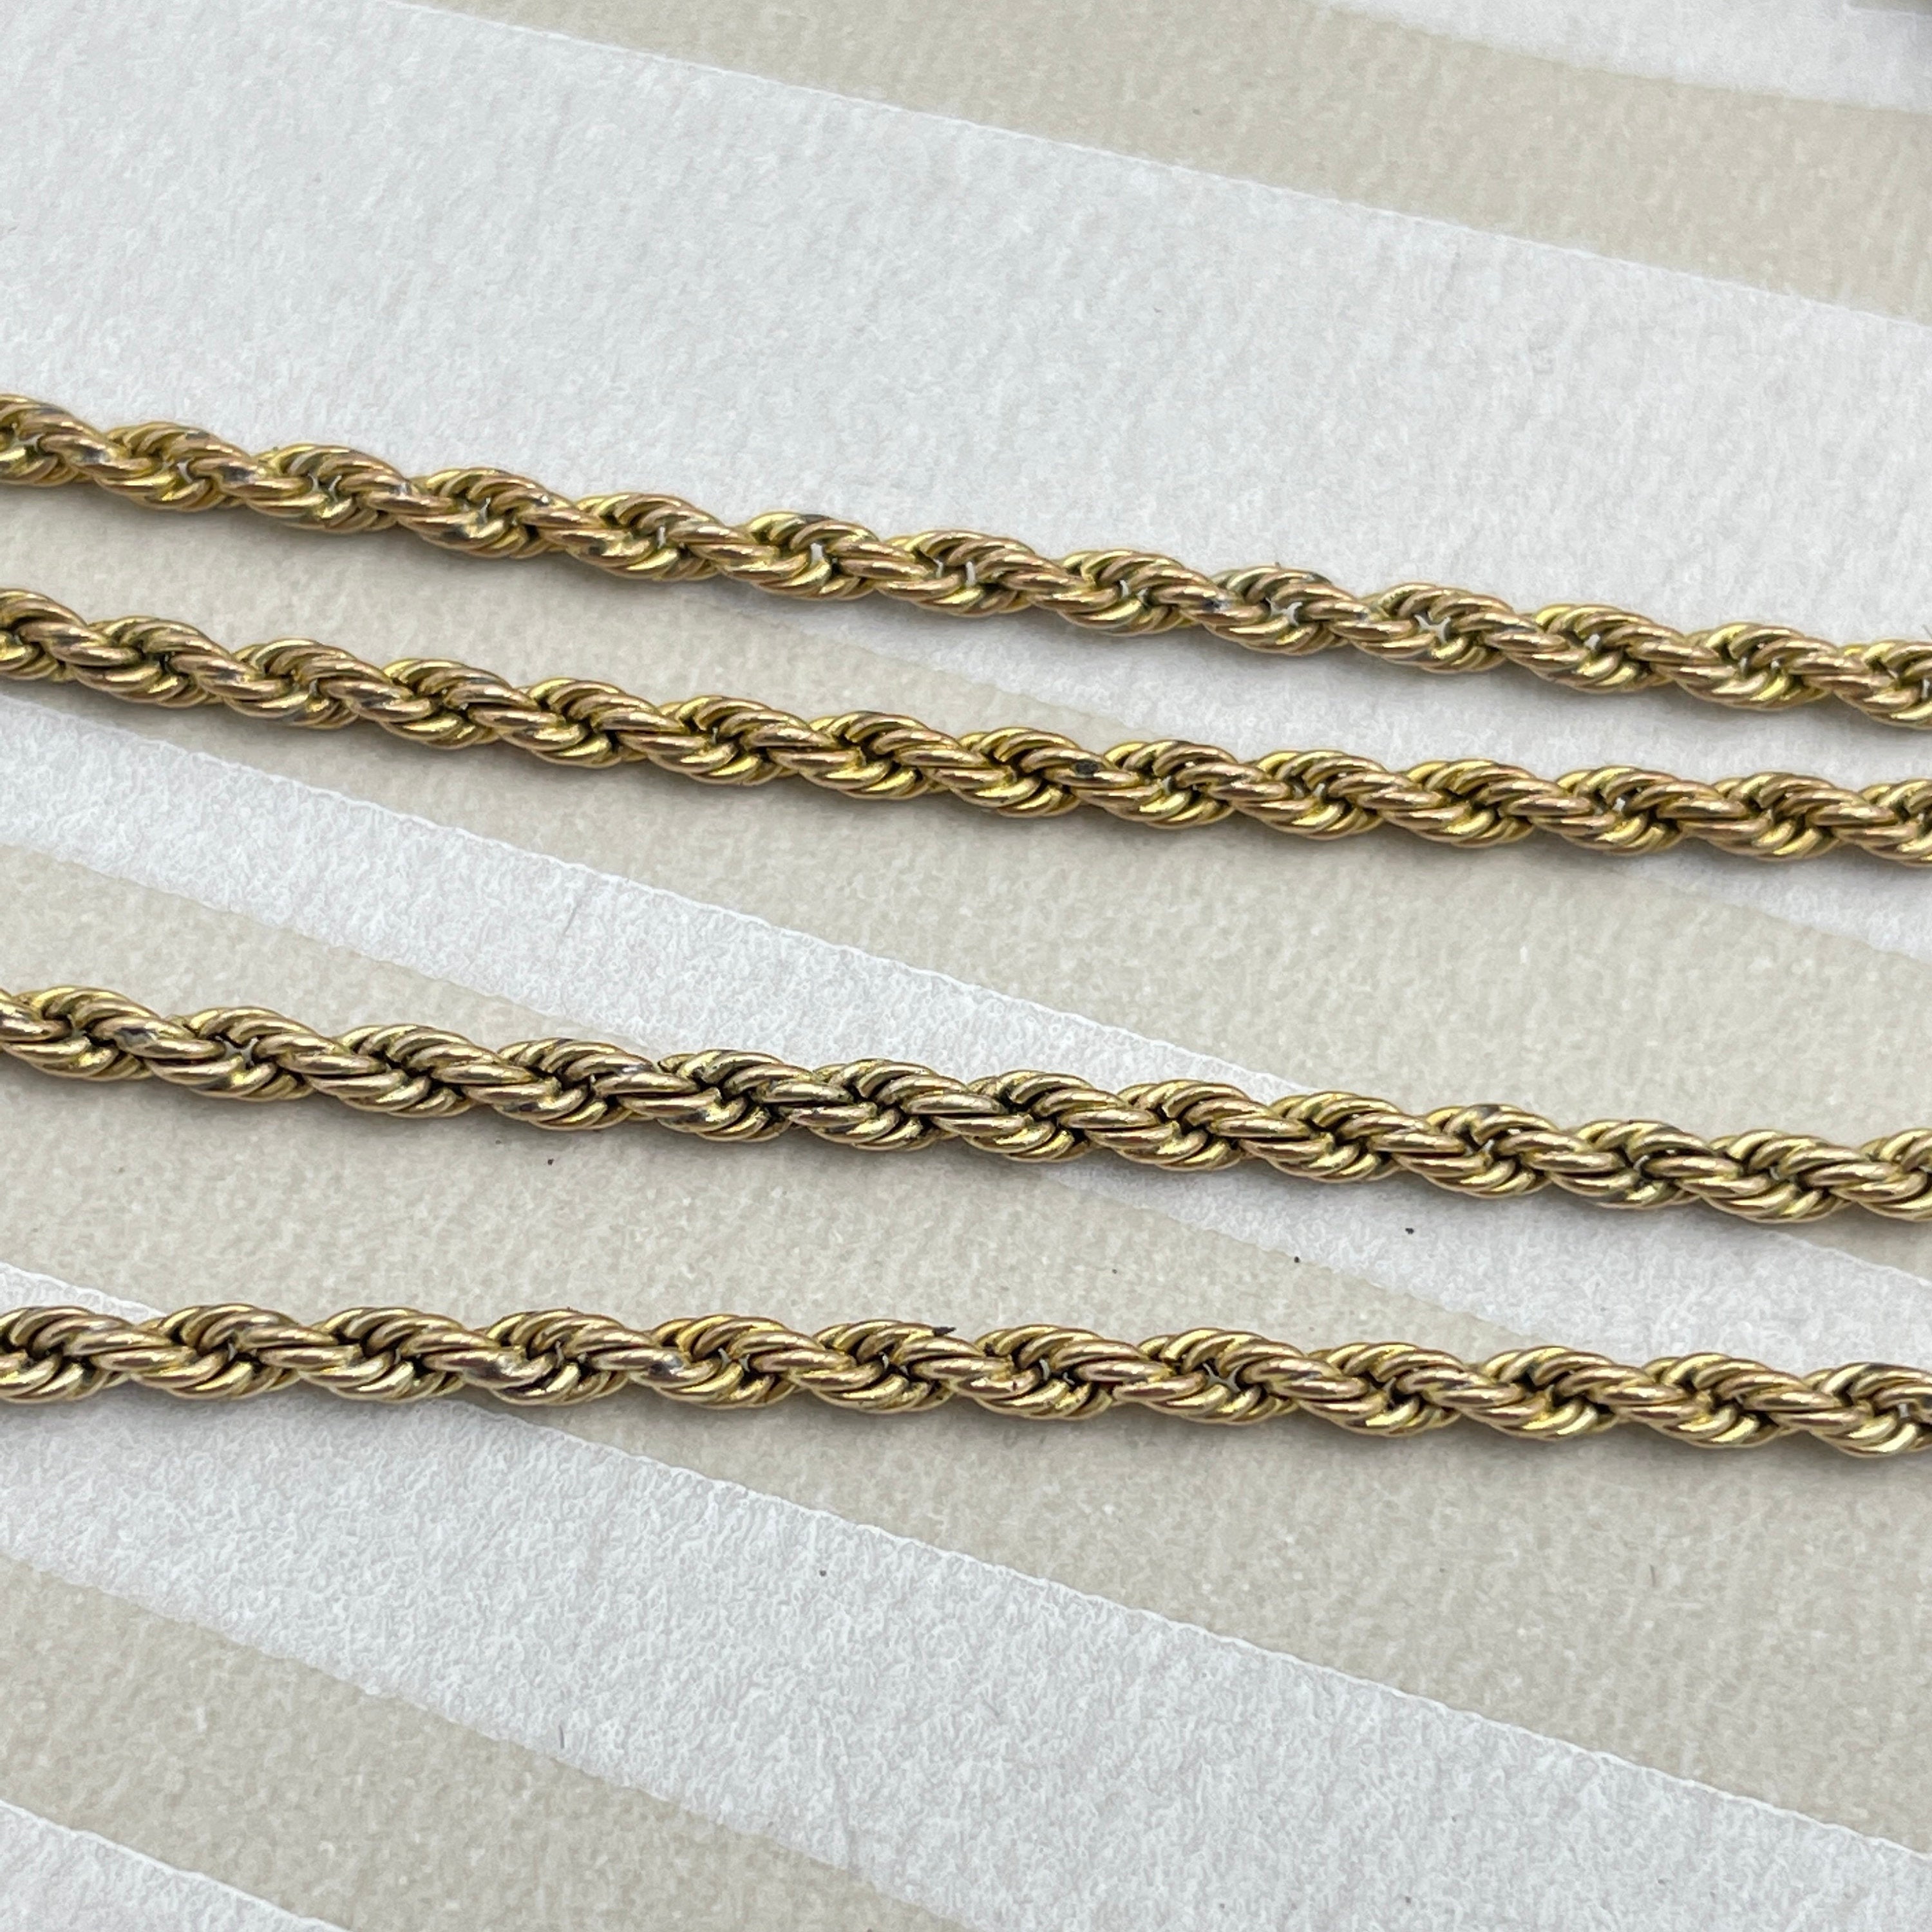 Antique rope link gold chain